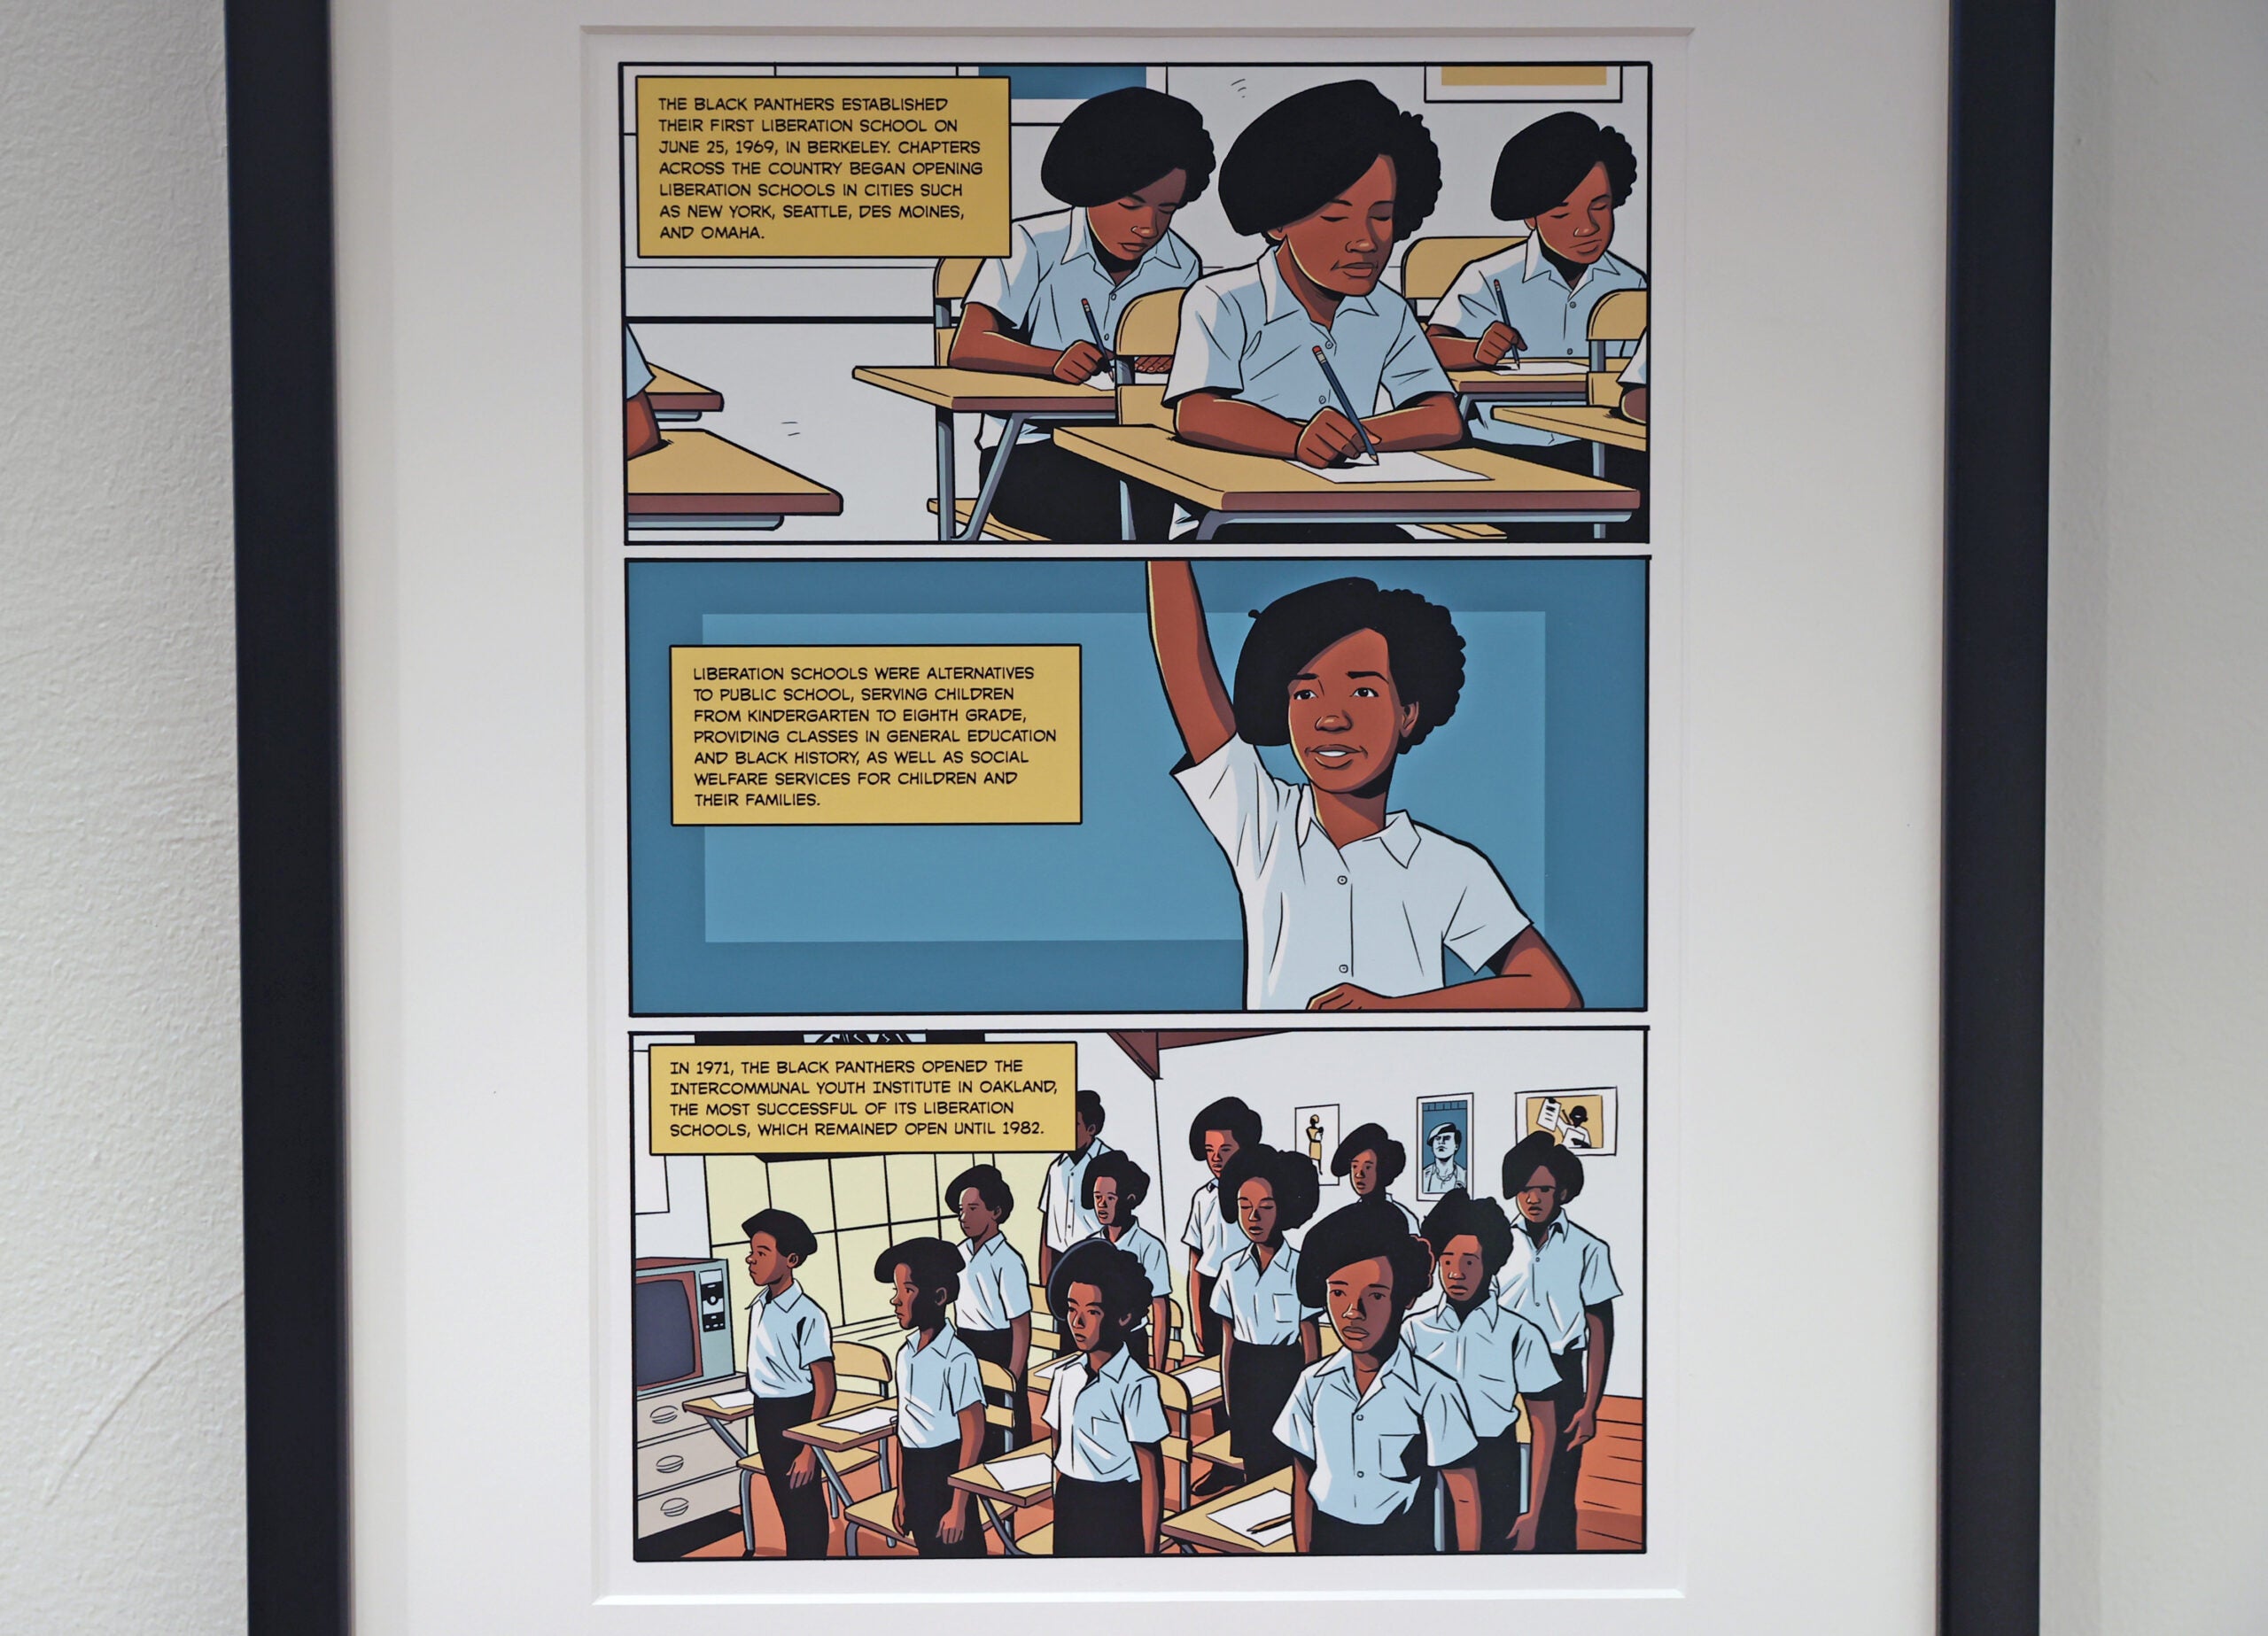 A girl raises her hand in a page from Marcus Kwame Anderson's "Liberation Schools," 2020., hanging in the Boston University Stone Gallery